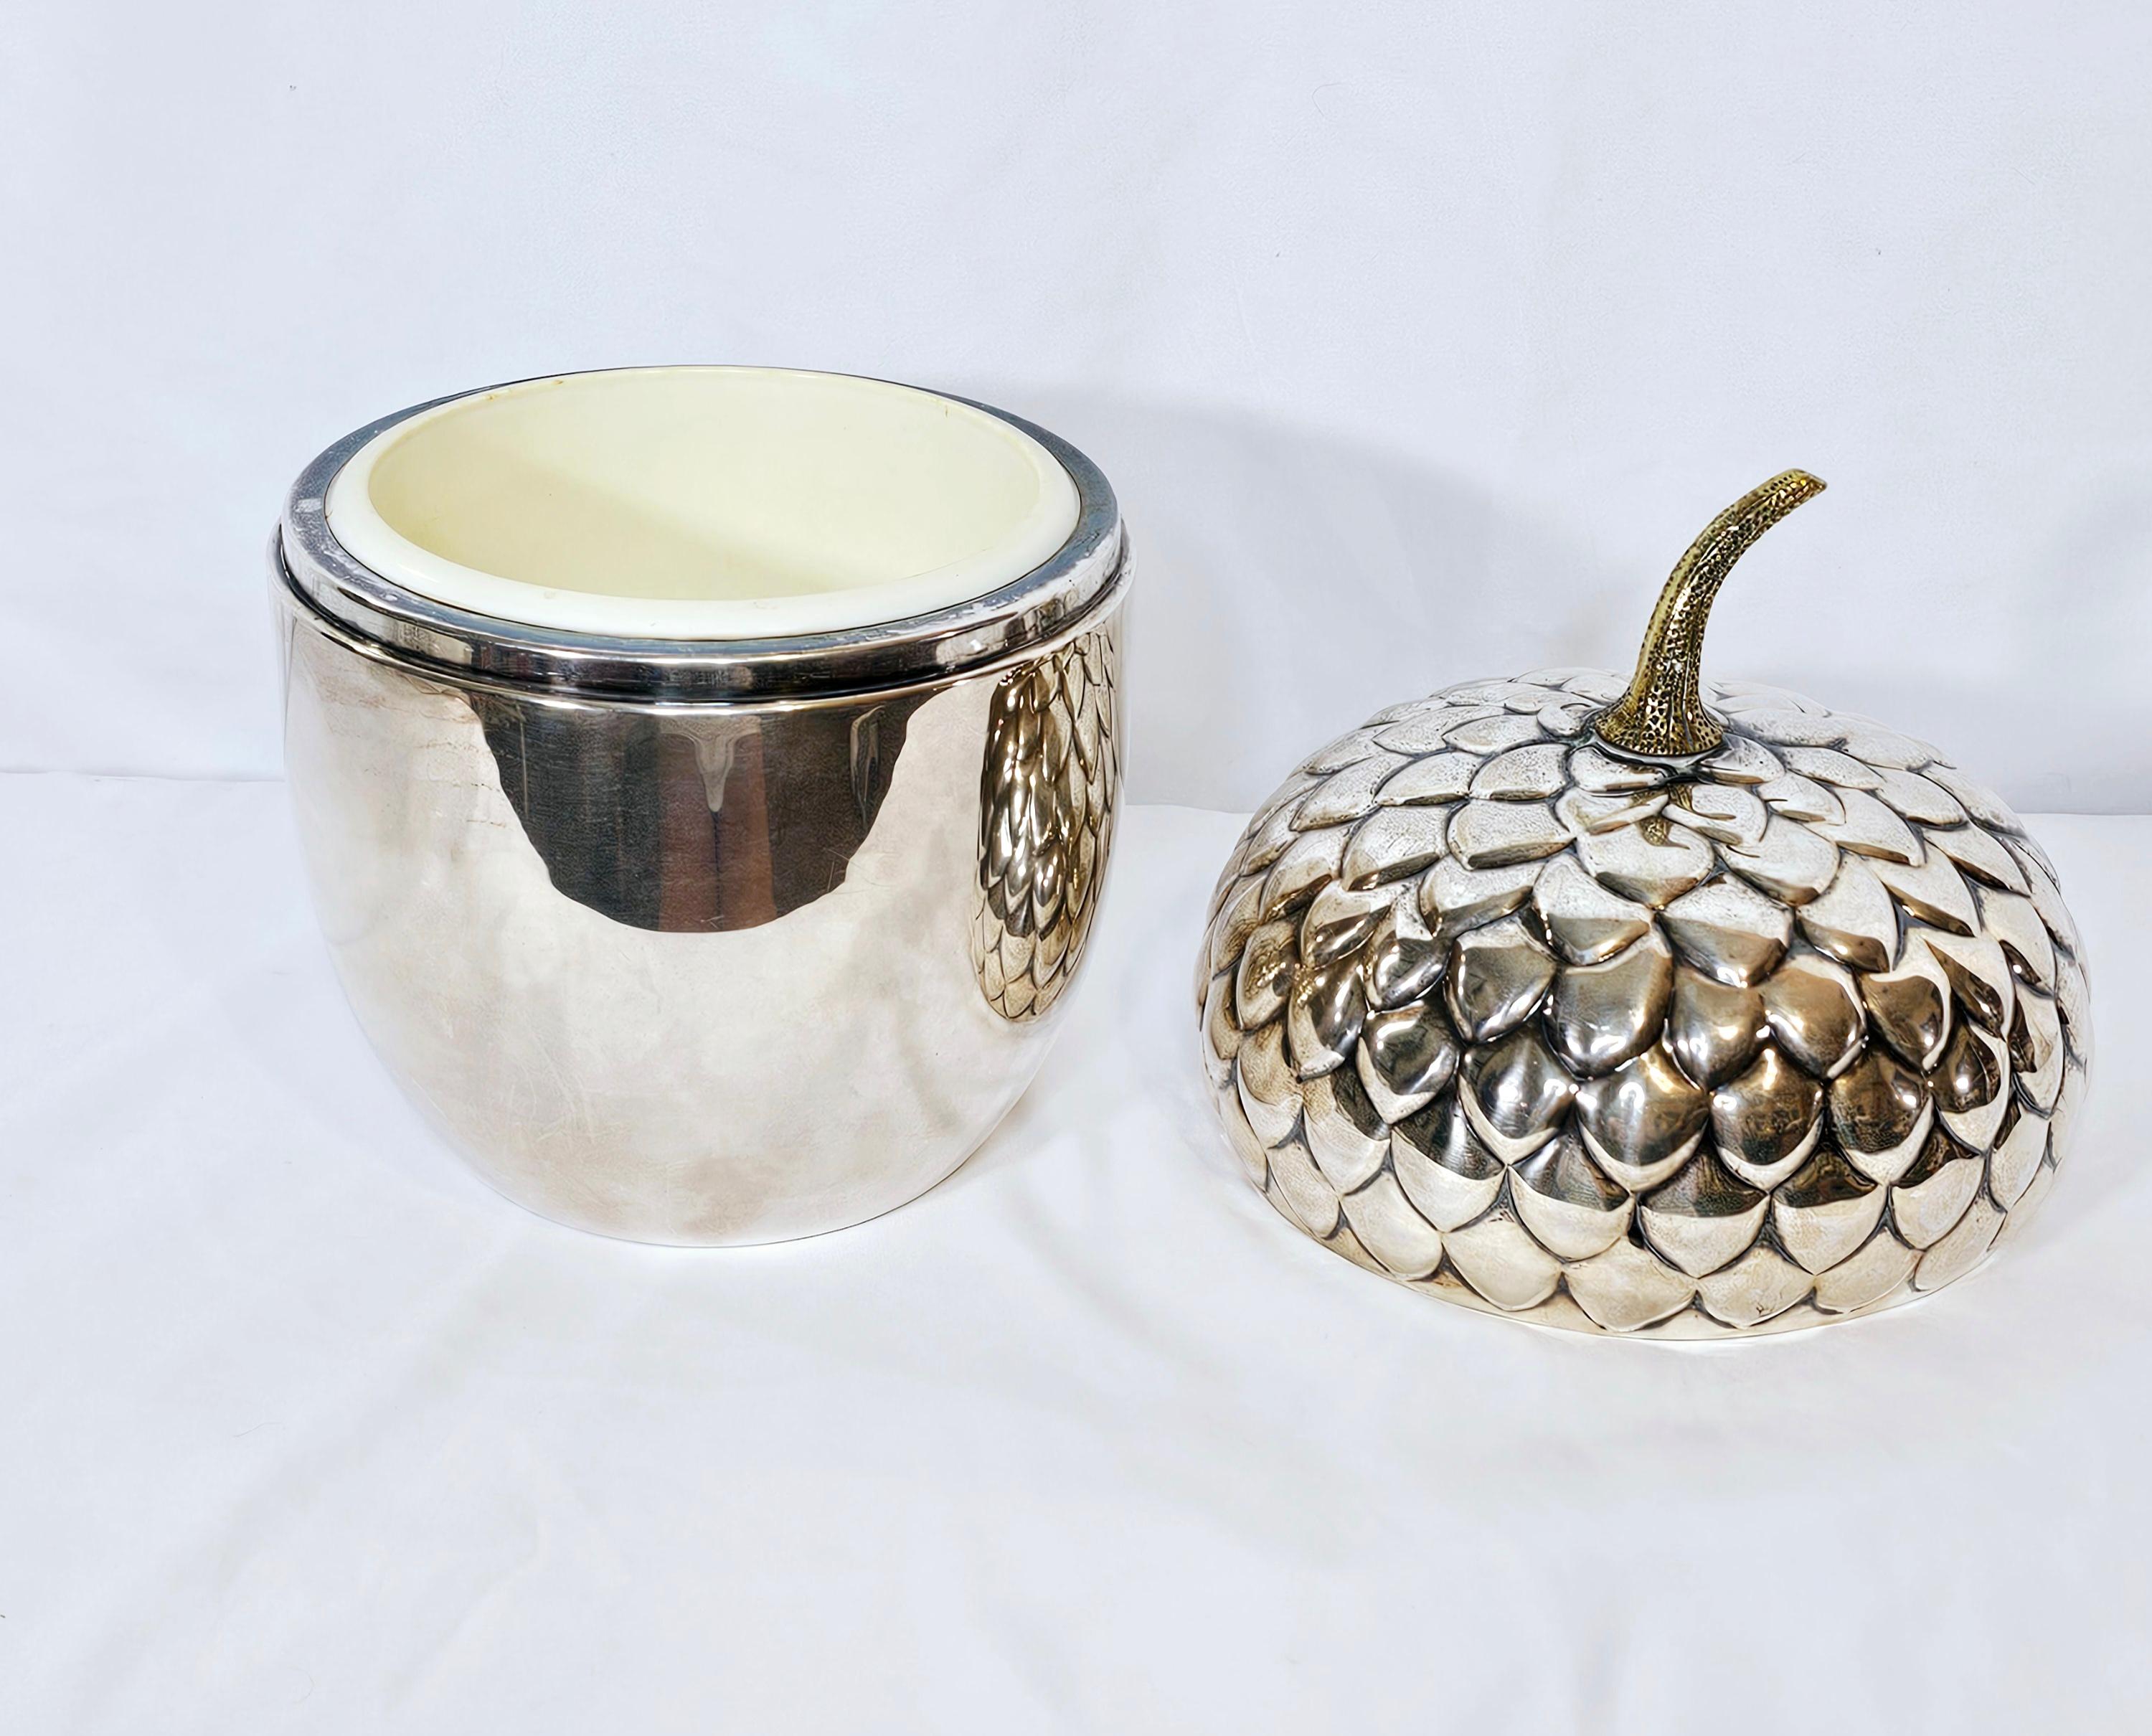 20th Century Acorn Shaped Ice Bucket by Teghini Firenze 1960s For Sale